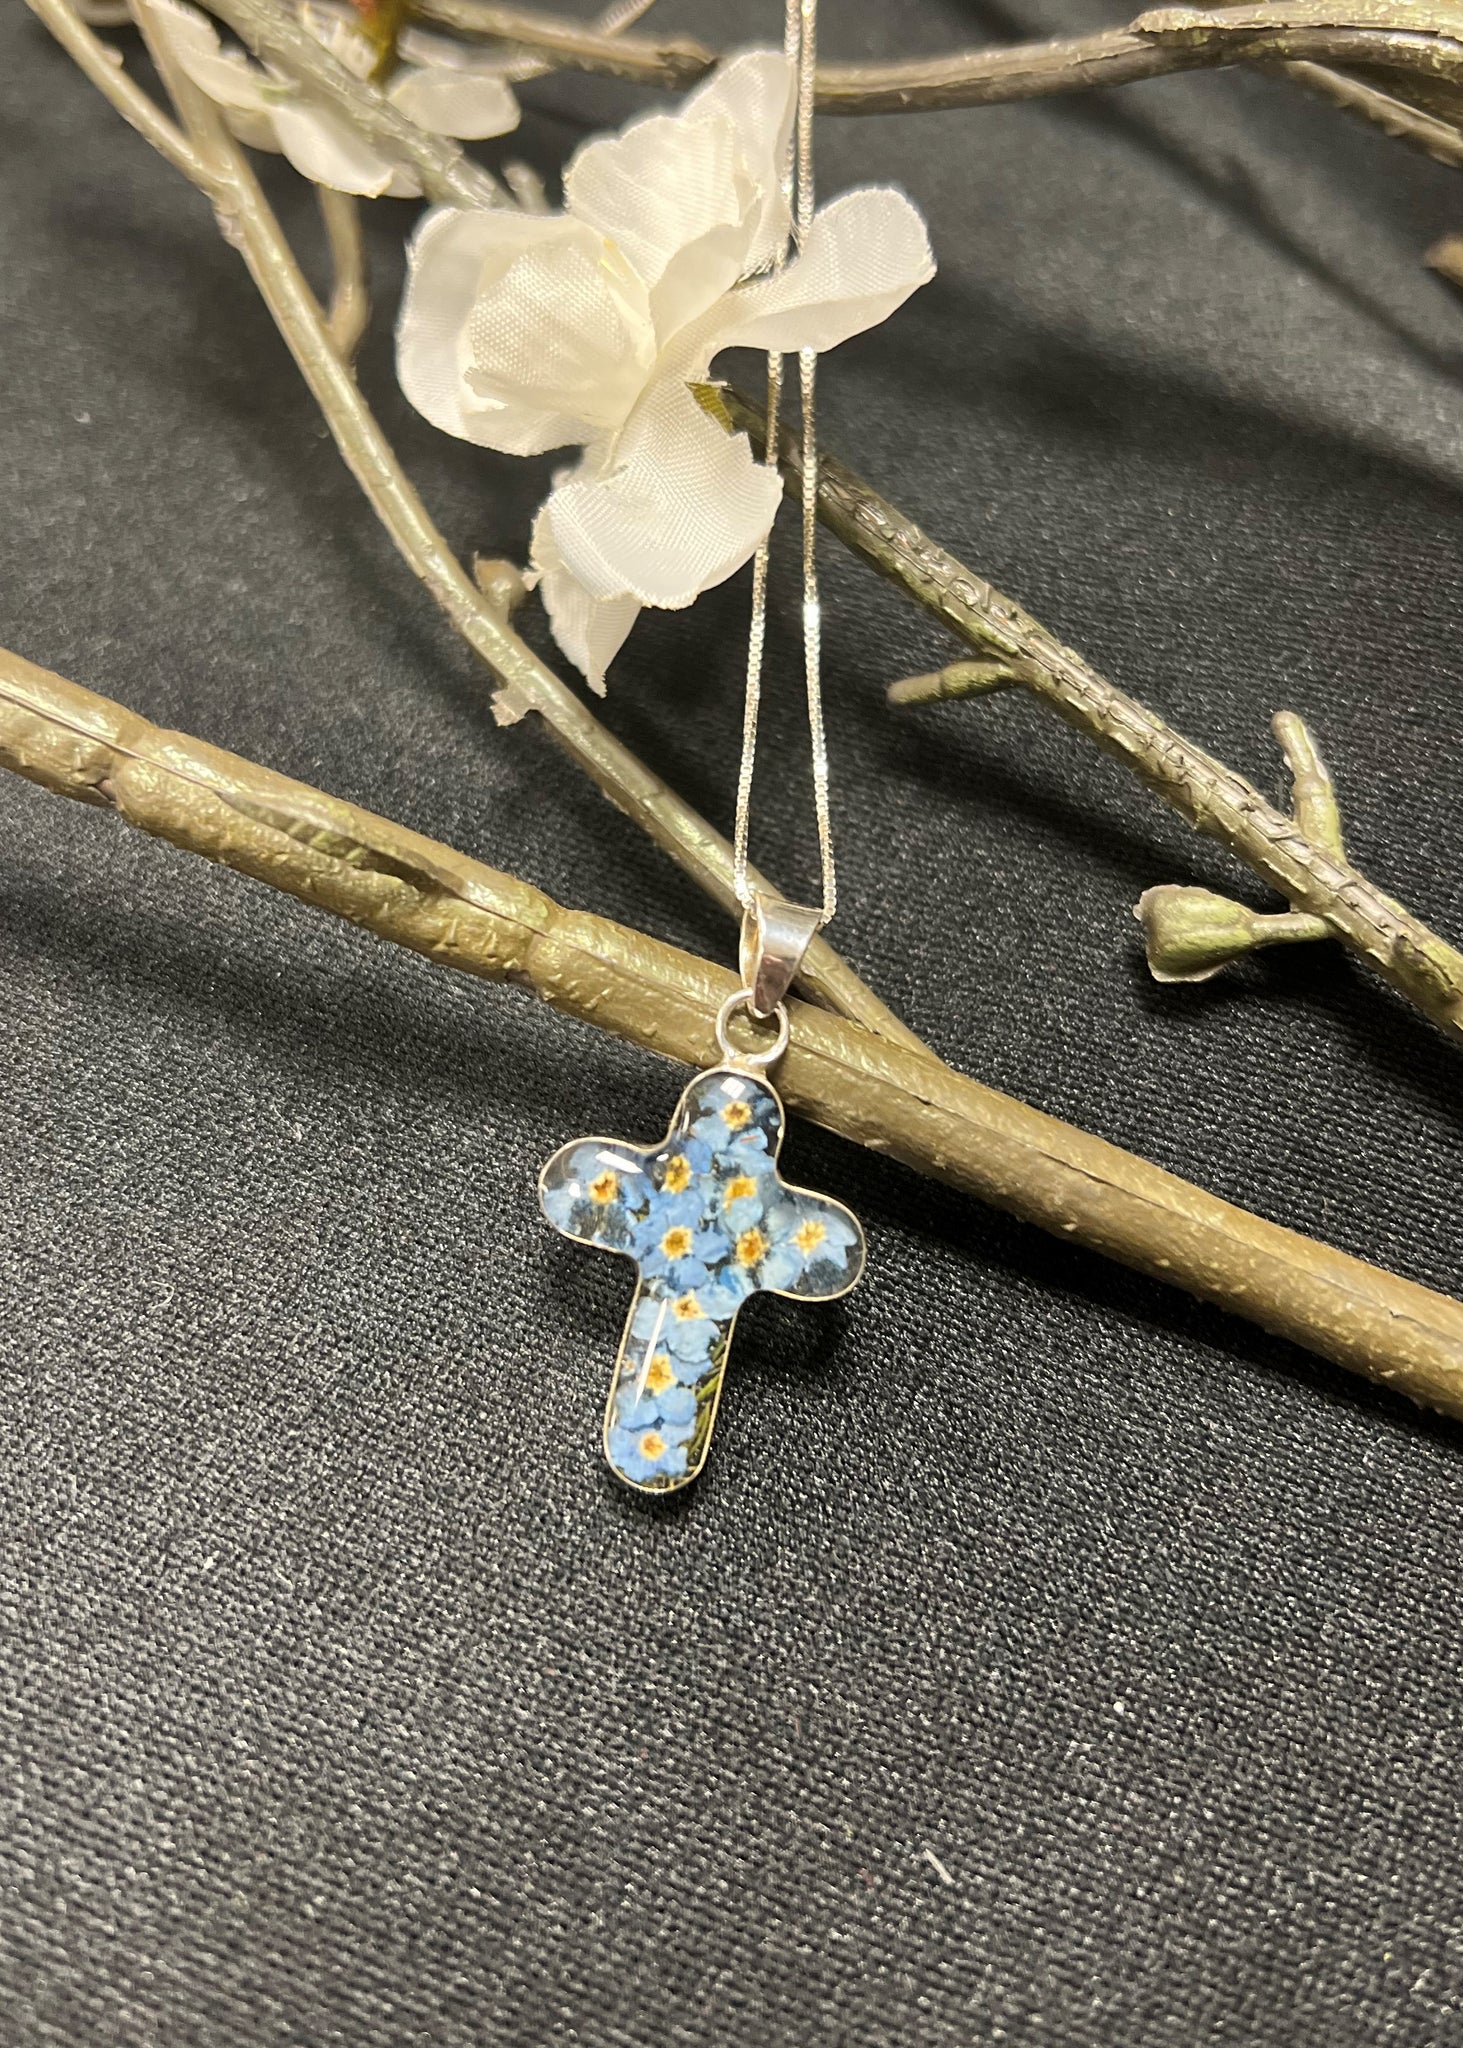 Forget Me Not Cross Necklace